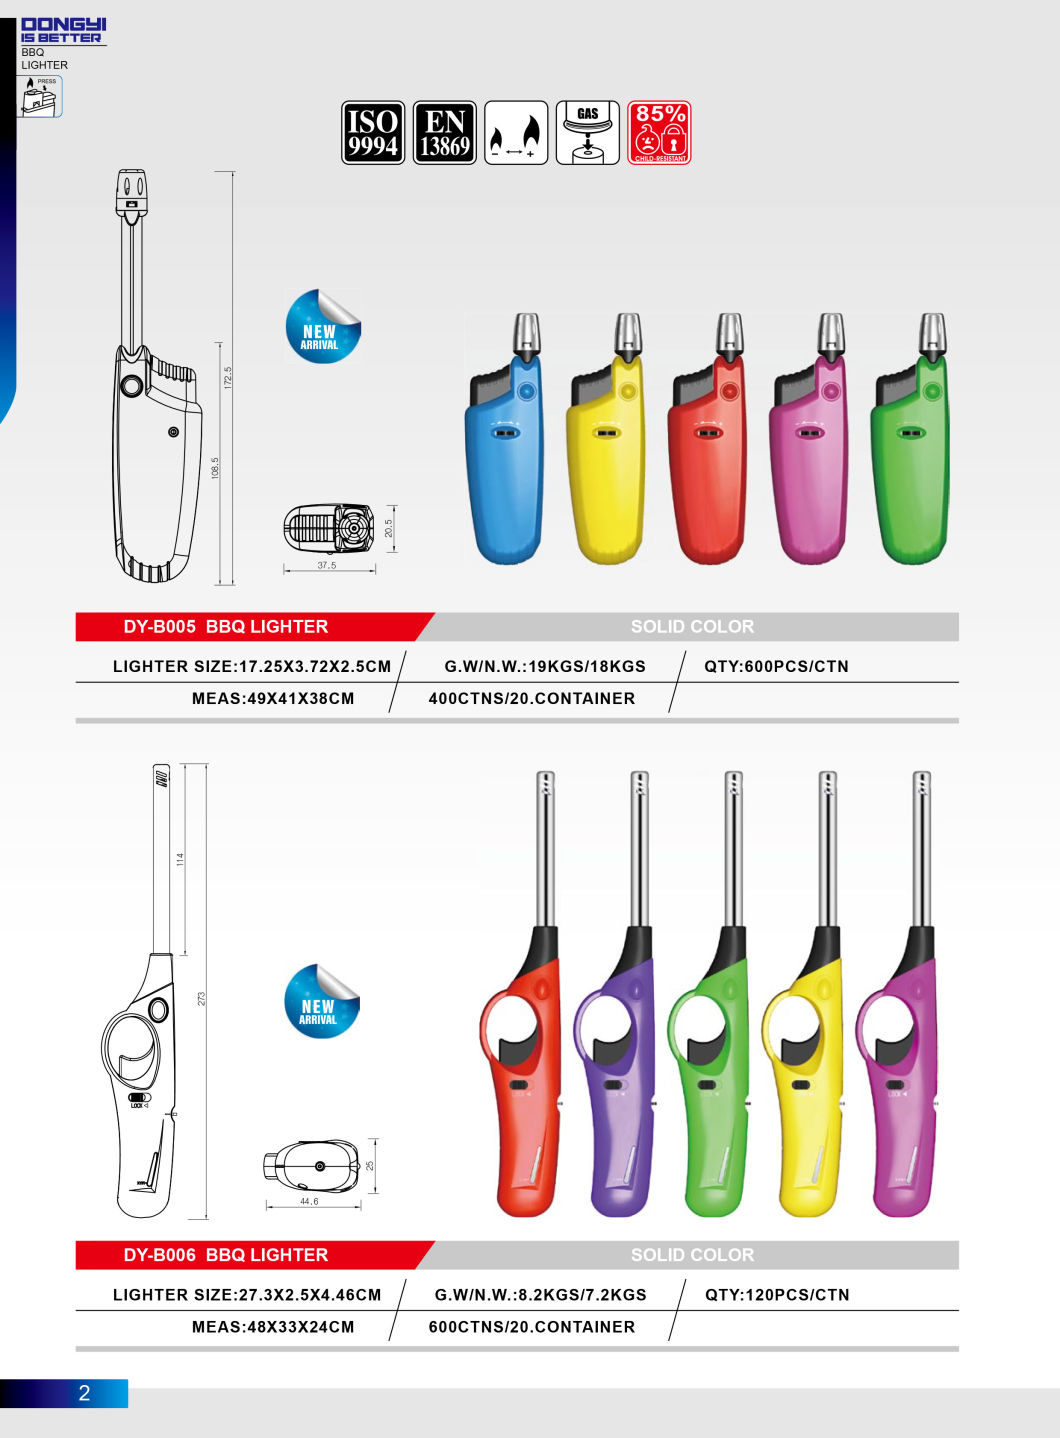 China Manufacturer Direct Supply Barbecue Lighters